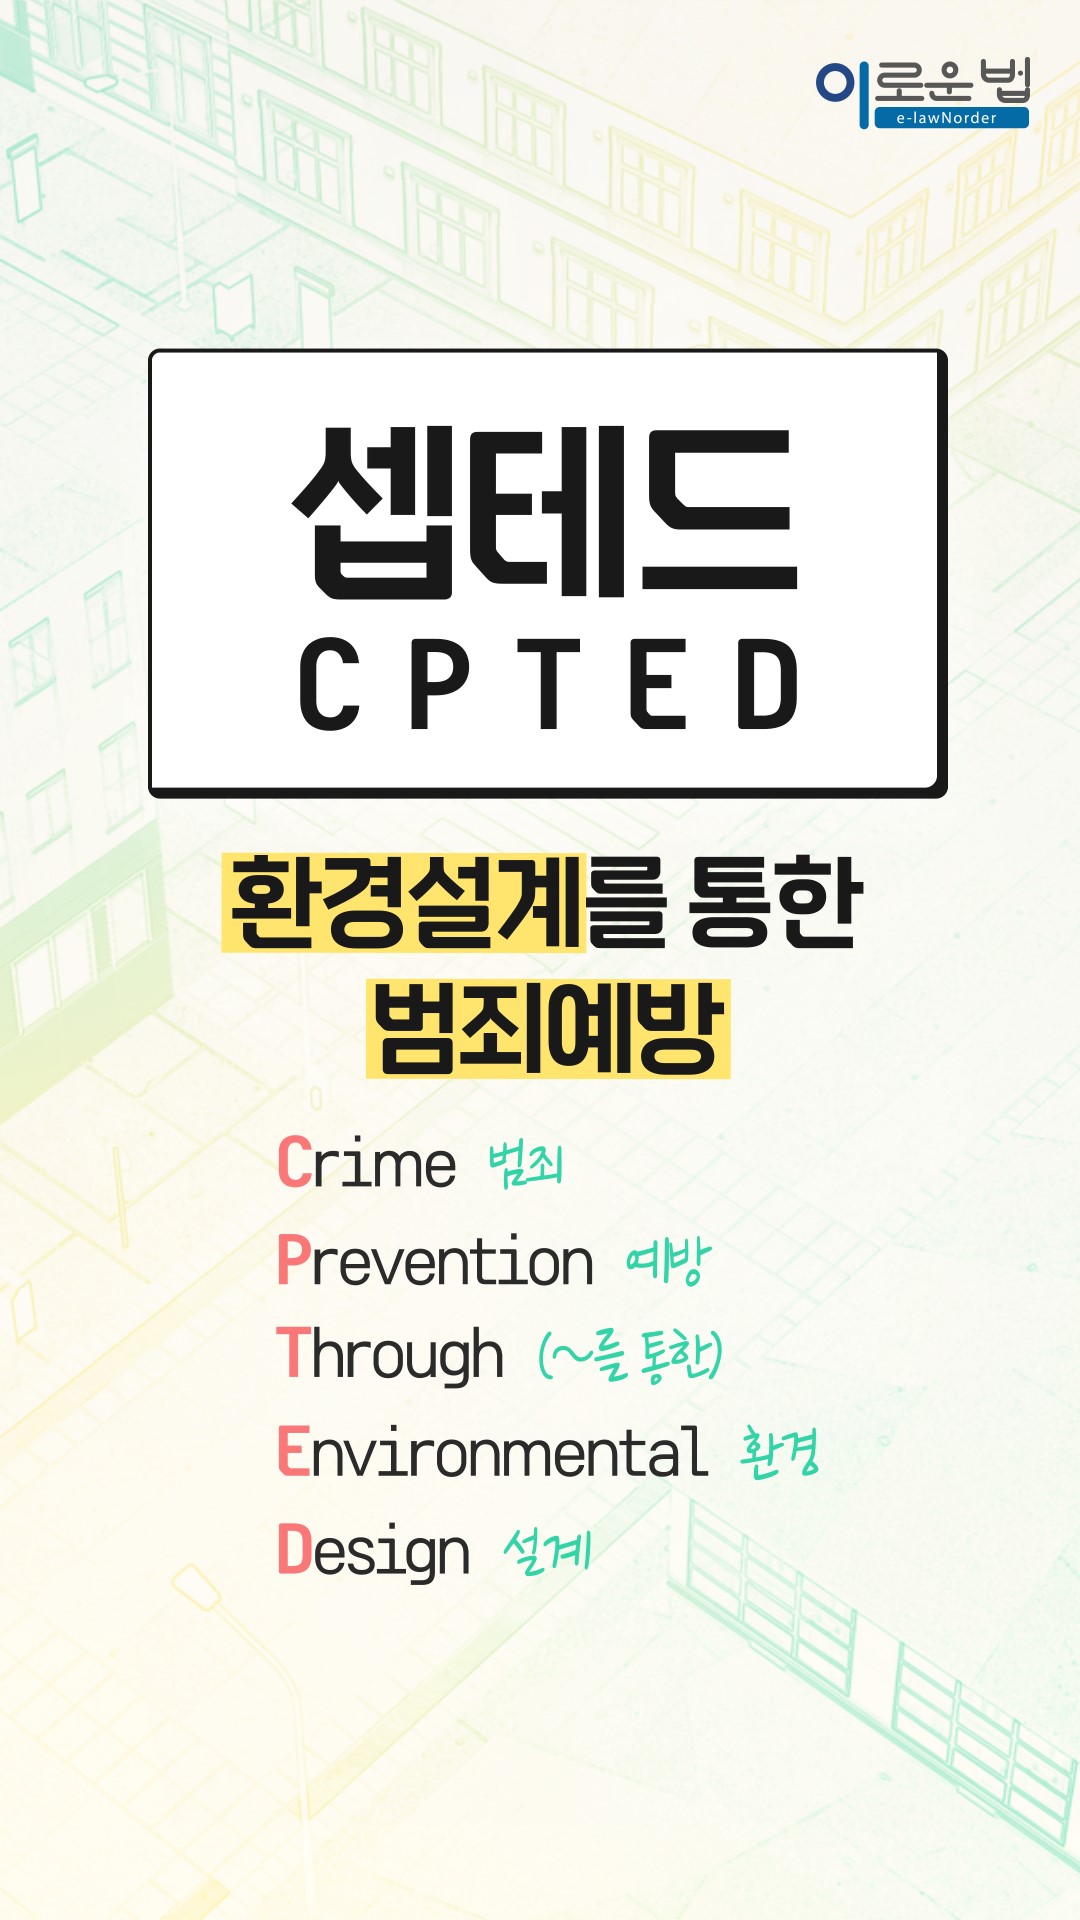 CPTED 개념